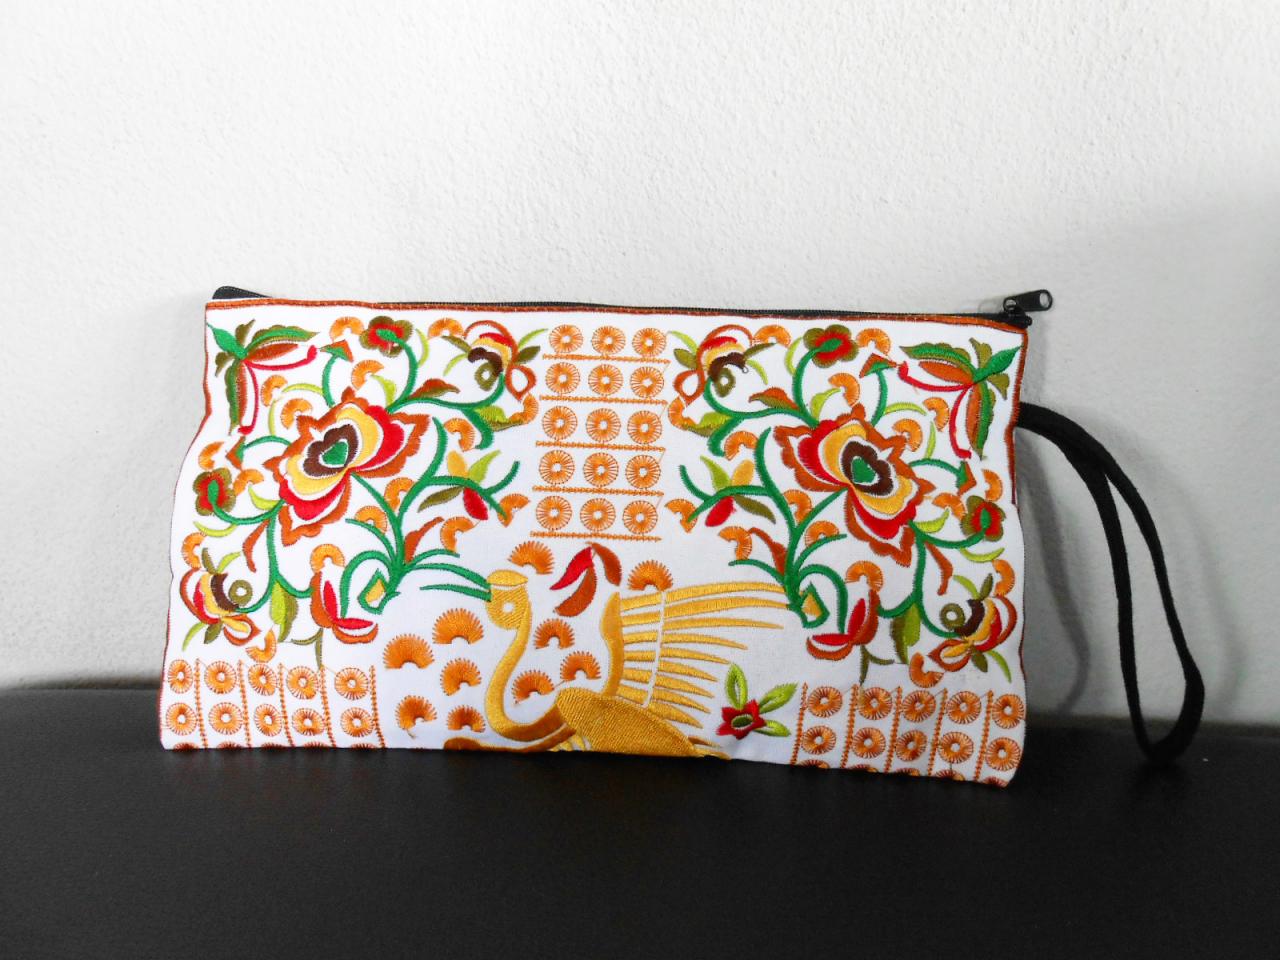 Yellow Flamingo Embroidered Clutch Bag, W/ White Fabric Chinese Hmong Hilltribe Handmade In Thailand. (kp1056-gowh)